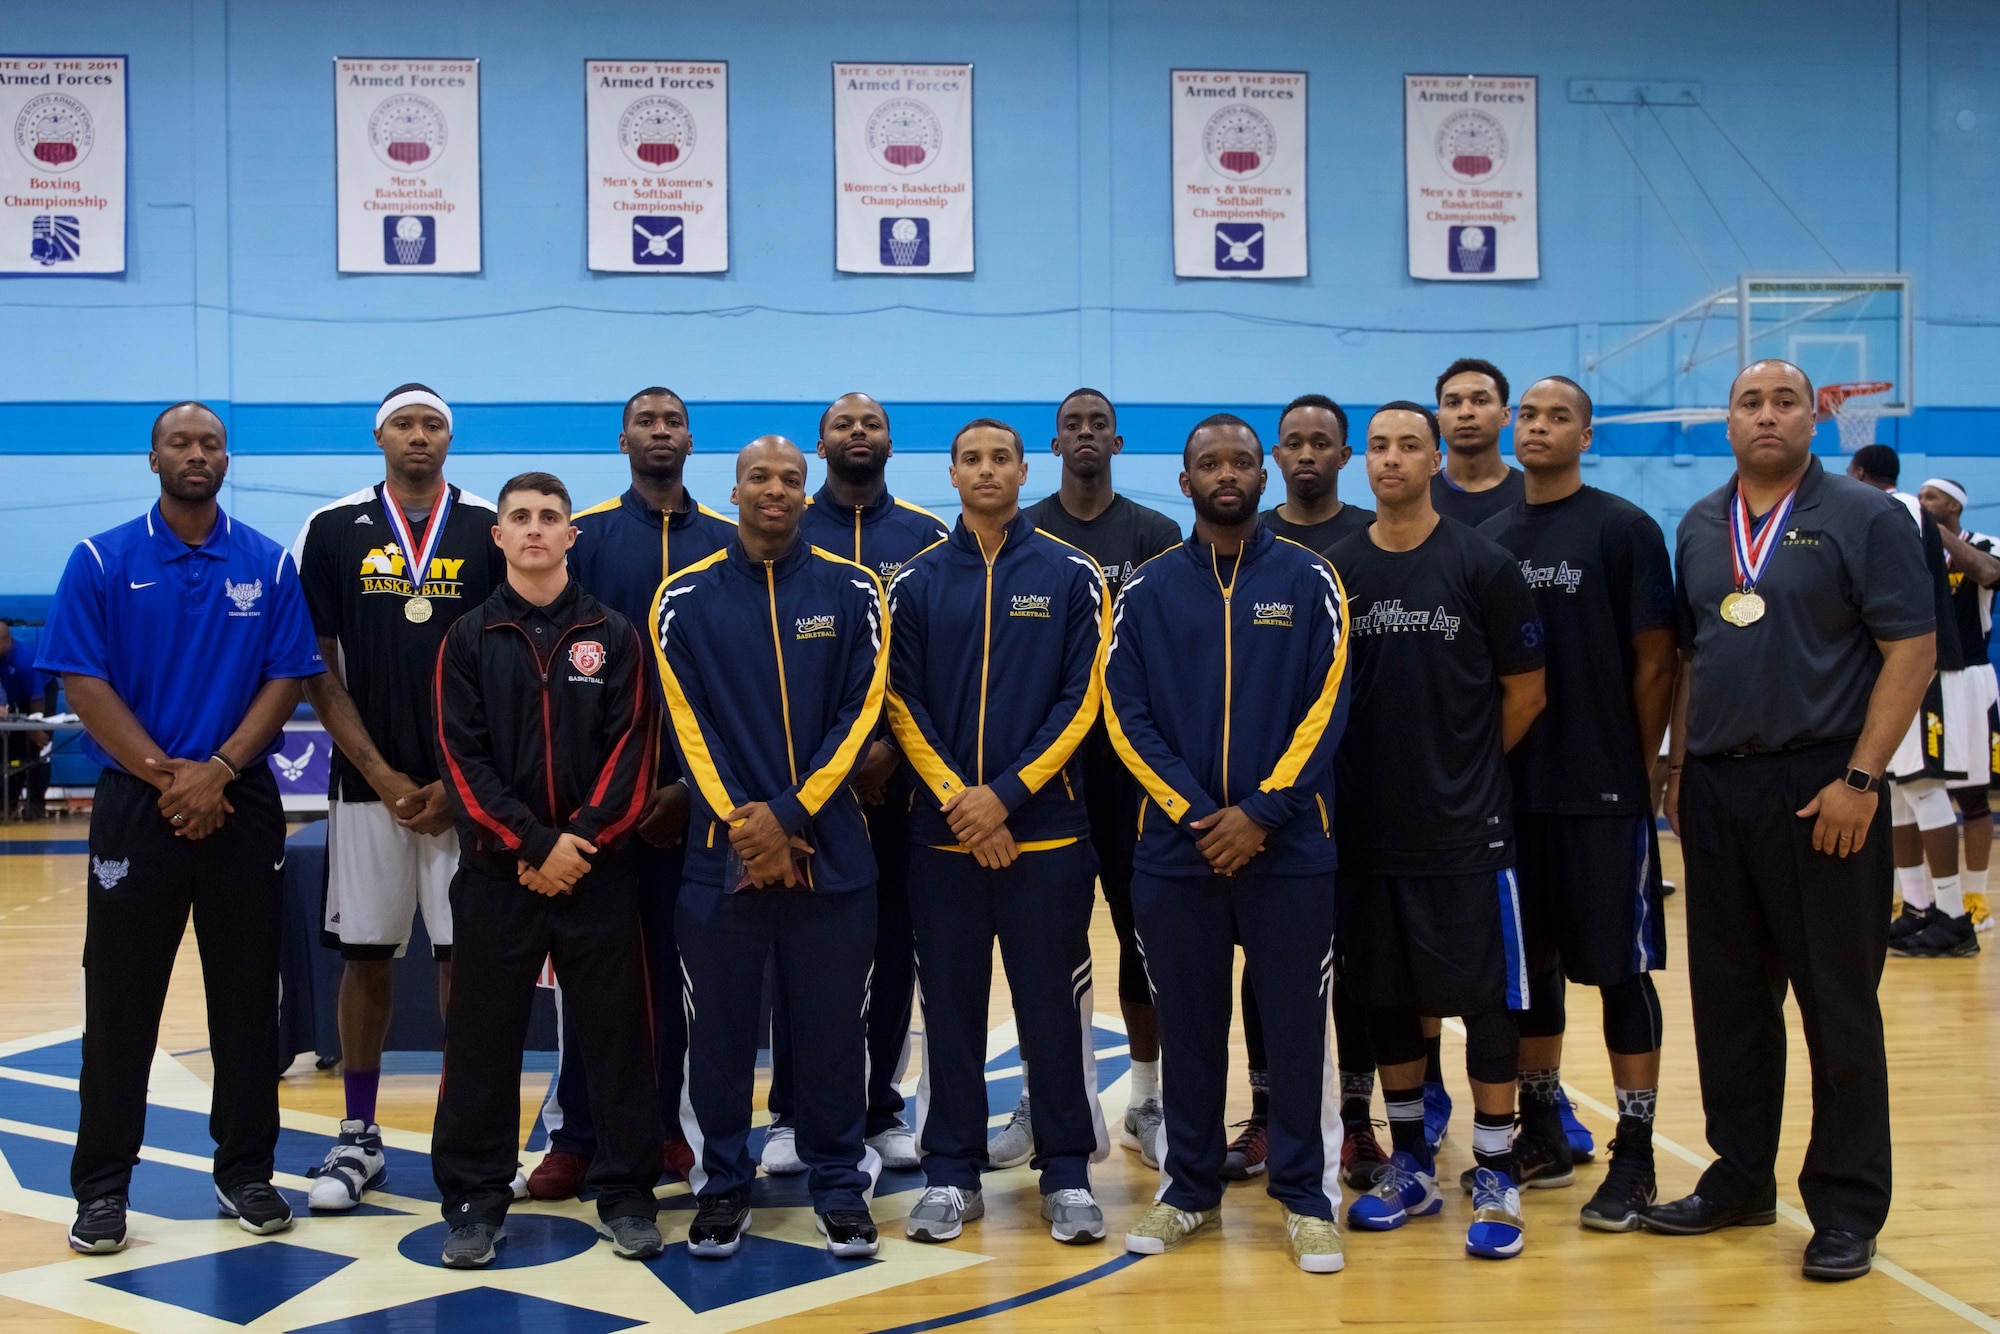 Tech. Sgt. Corey Rucker poses with fellow members of the U.S. Armed Forces Men's Basketball Team at Lackland Air Force Base, Texas, Nov. 7, 2107. The team won gold at the SHAPE International Basketball Tournament in Europe.